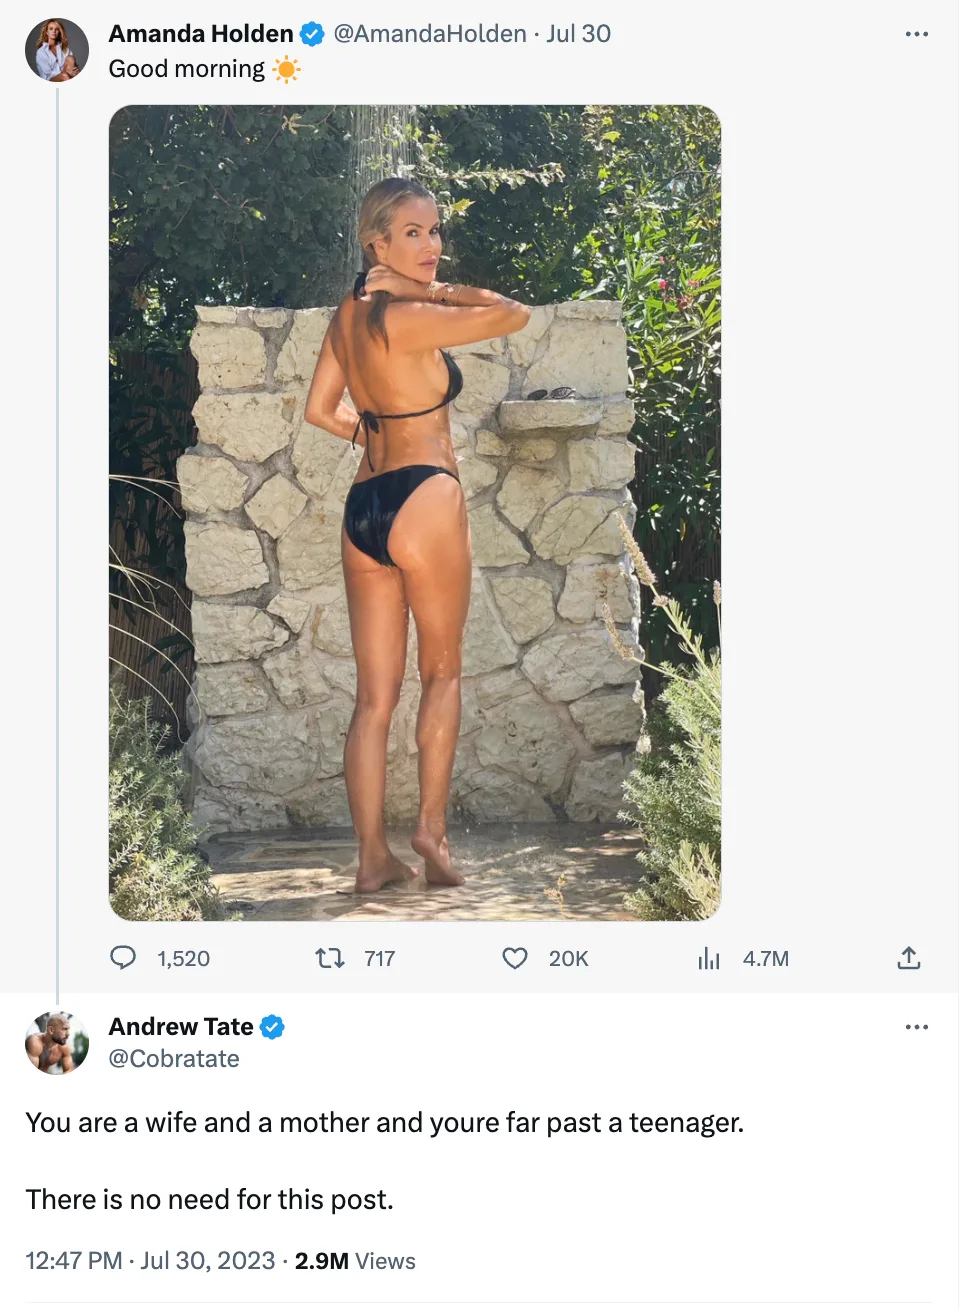 Andrew Tate's comment